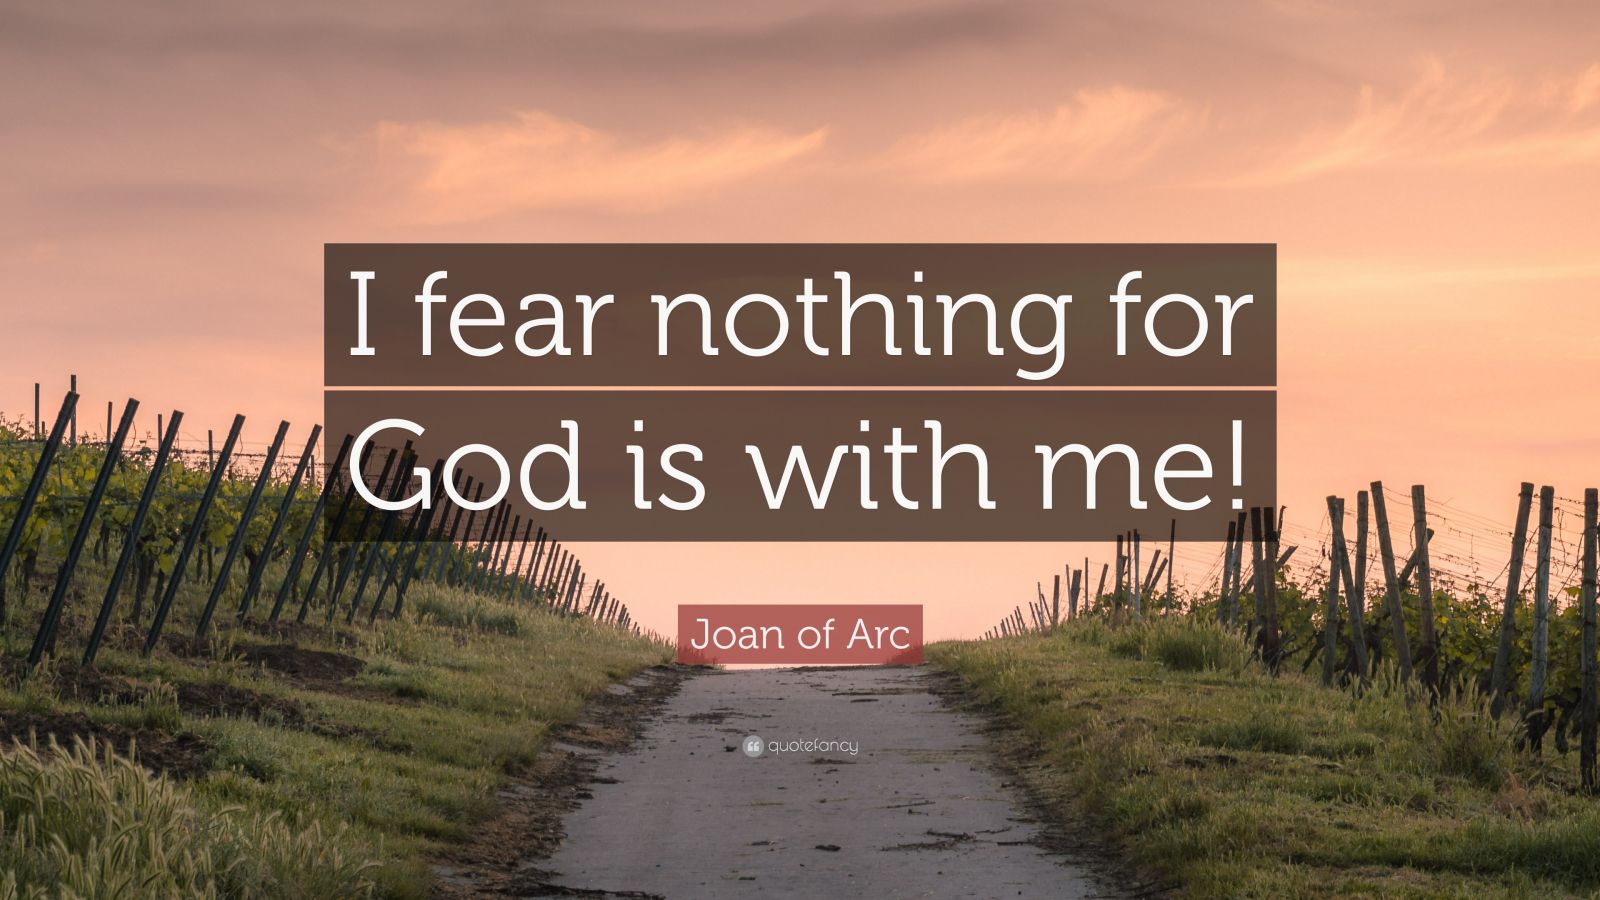 Joan of Arc Quote: “I fear nothing for God is with me!” (12 wallpapers